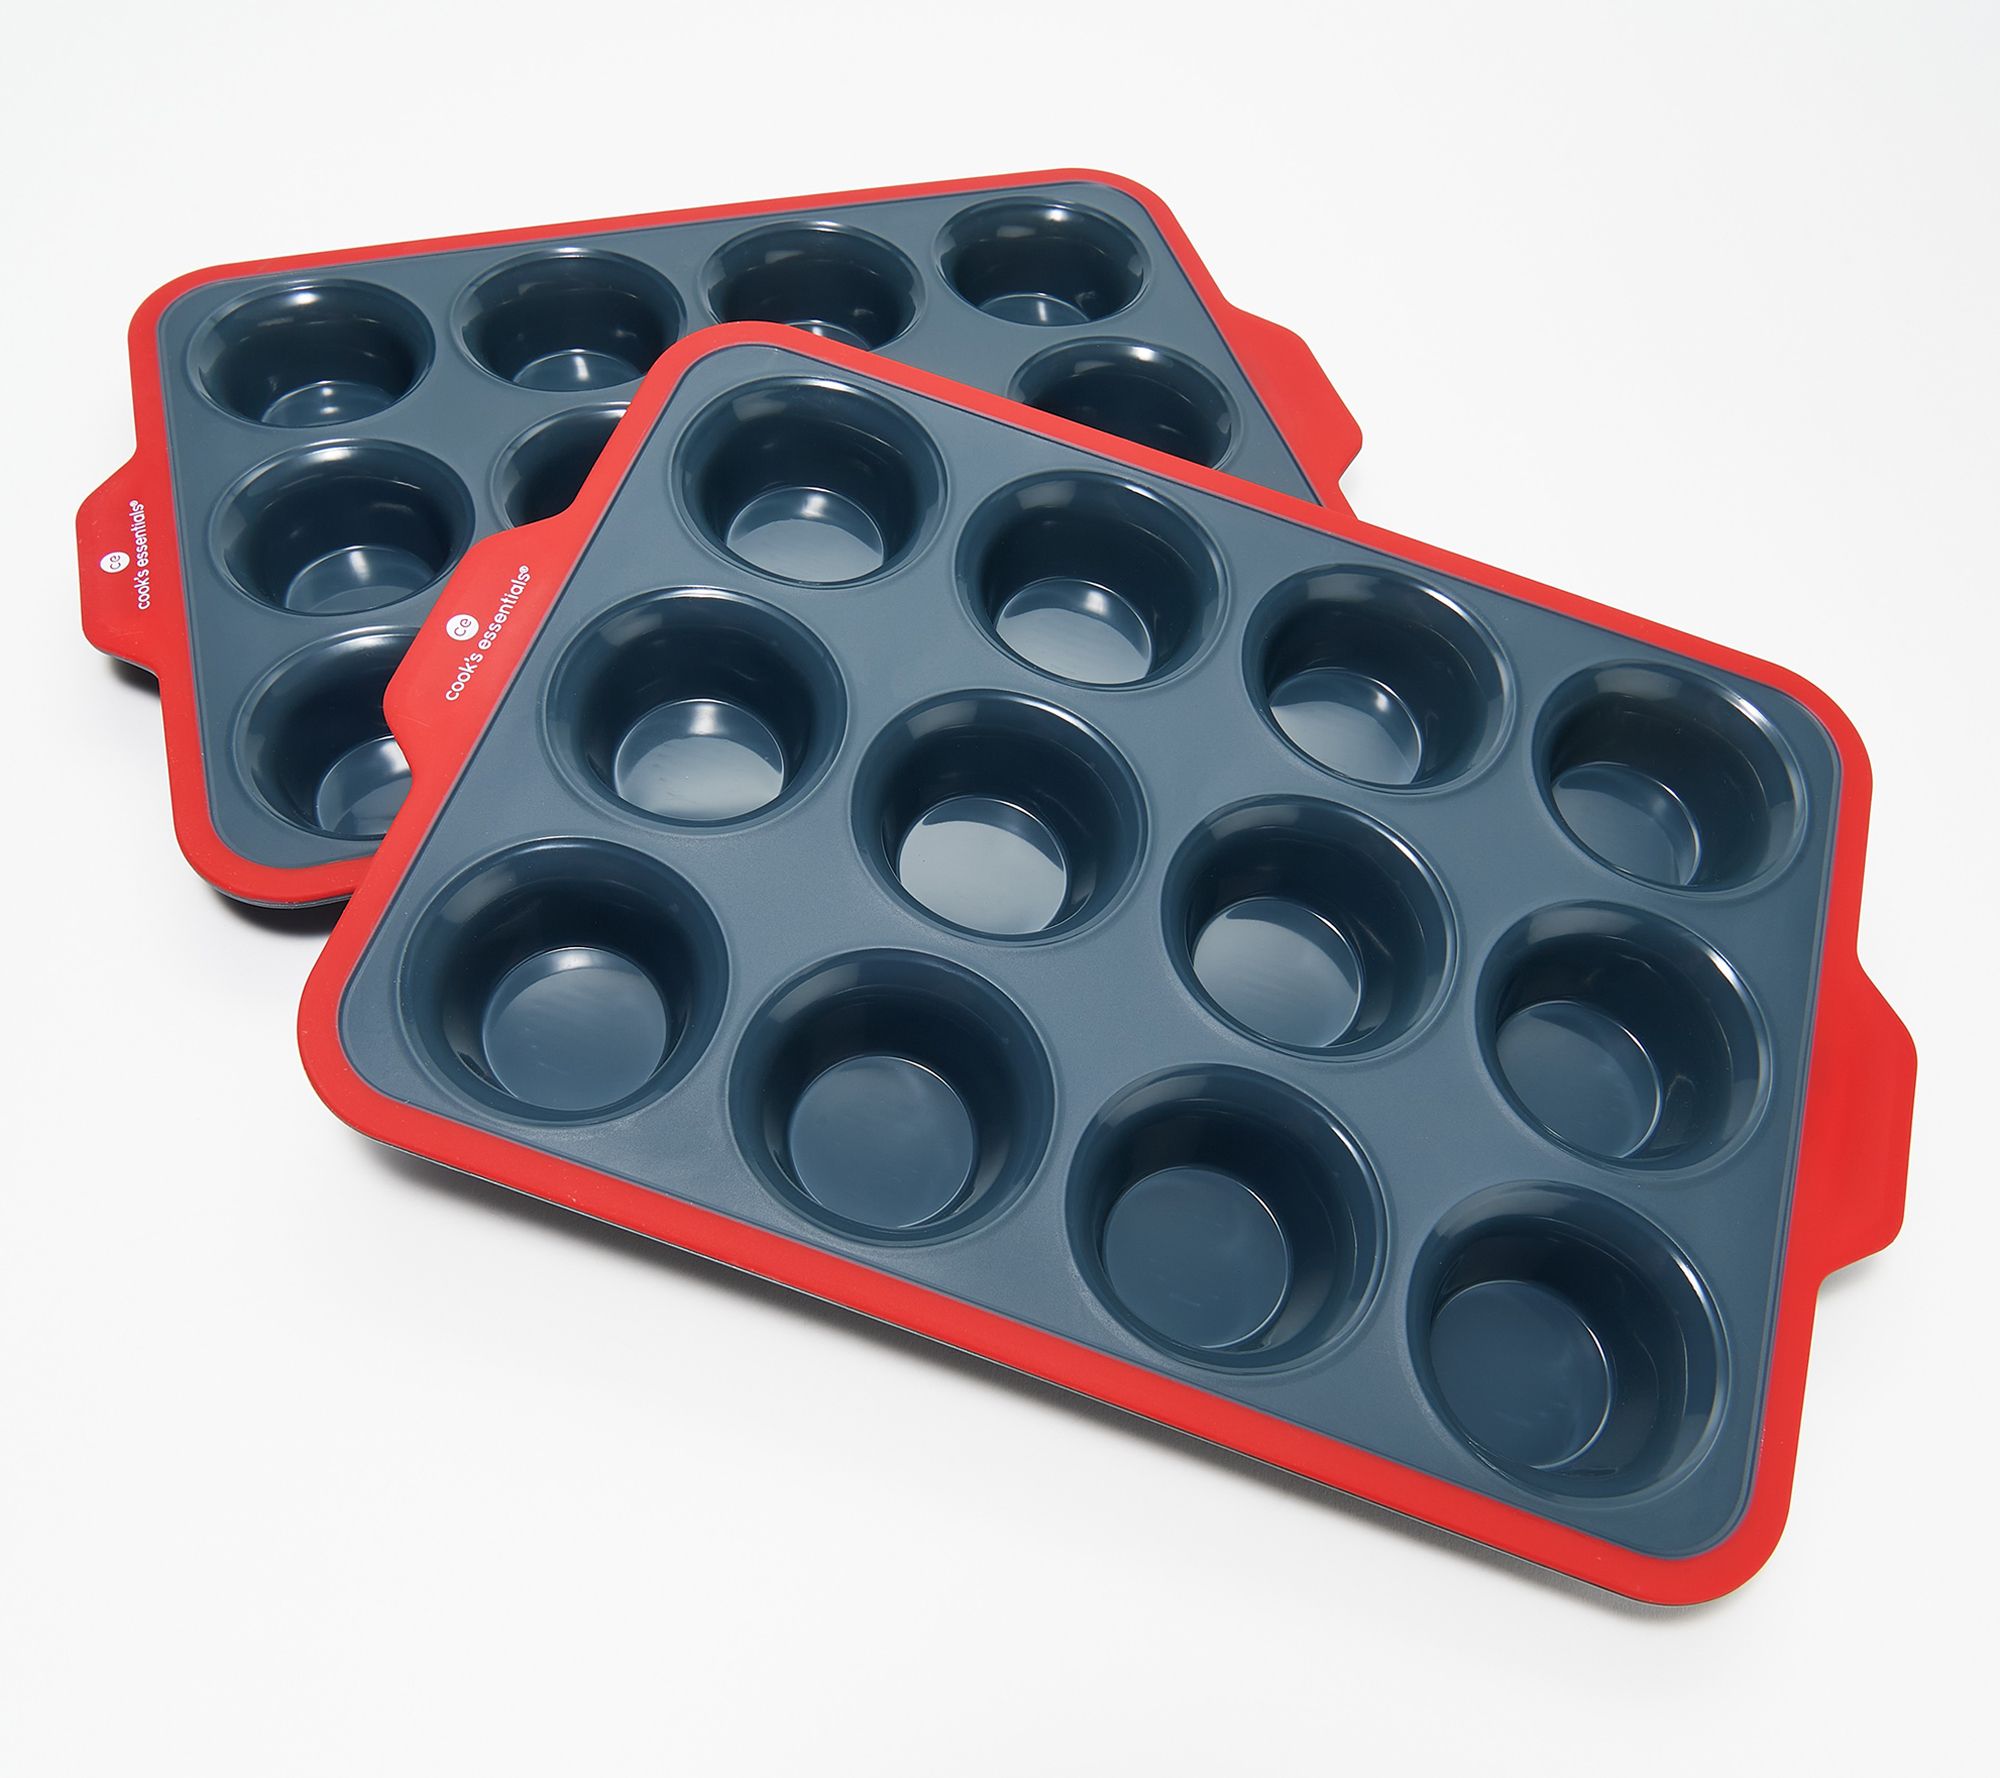 Cook's Essentials Set of (2) 12-Cup Silicone Muffin Pans 